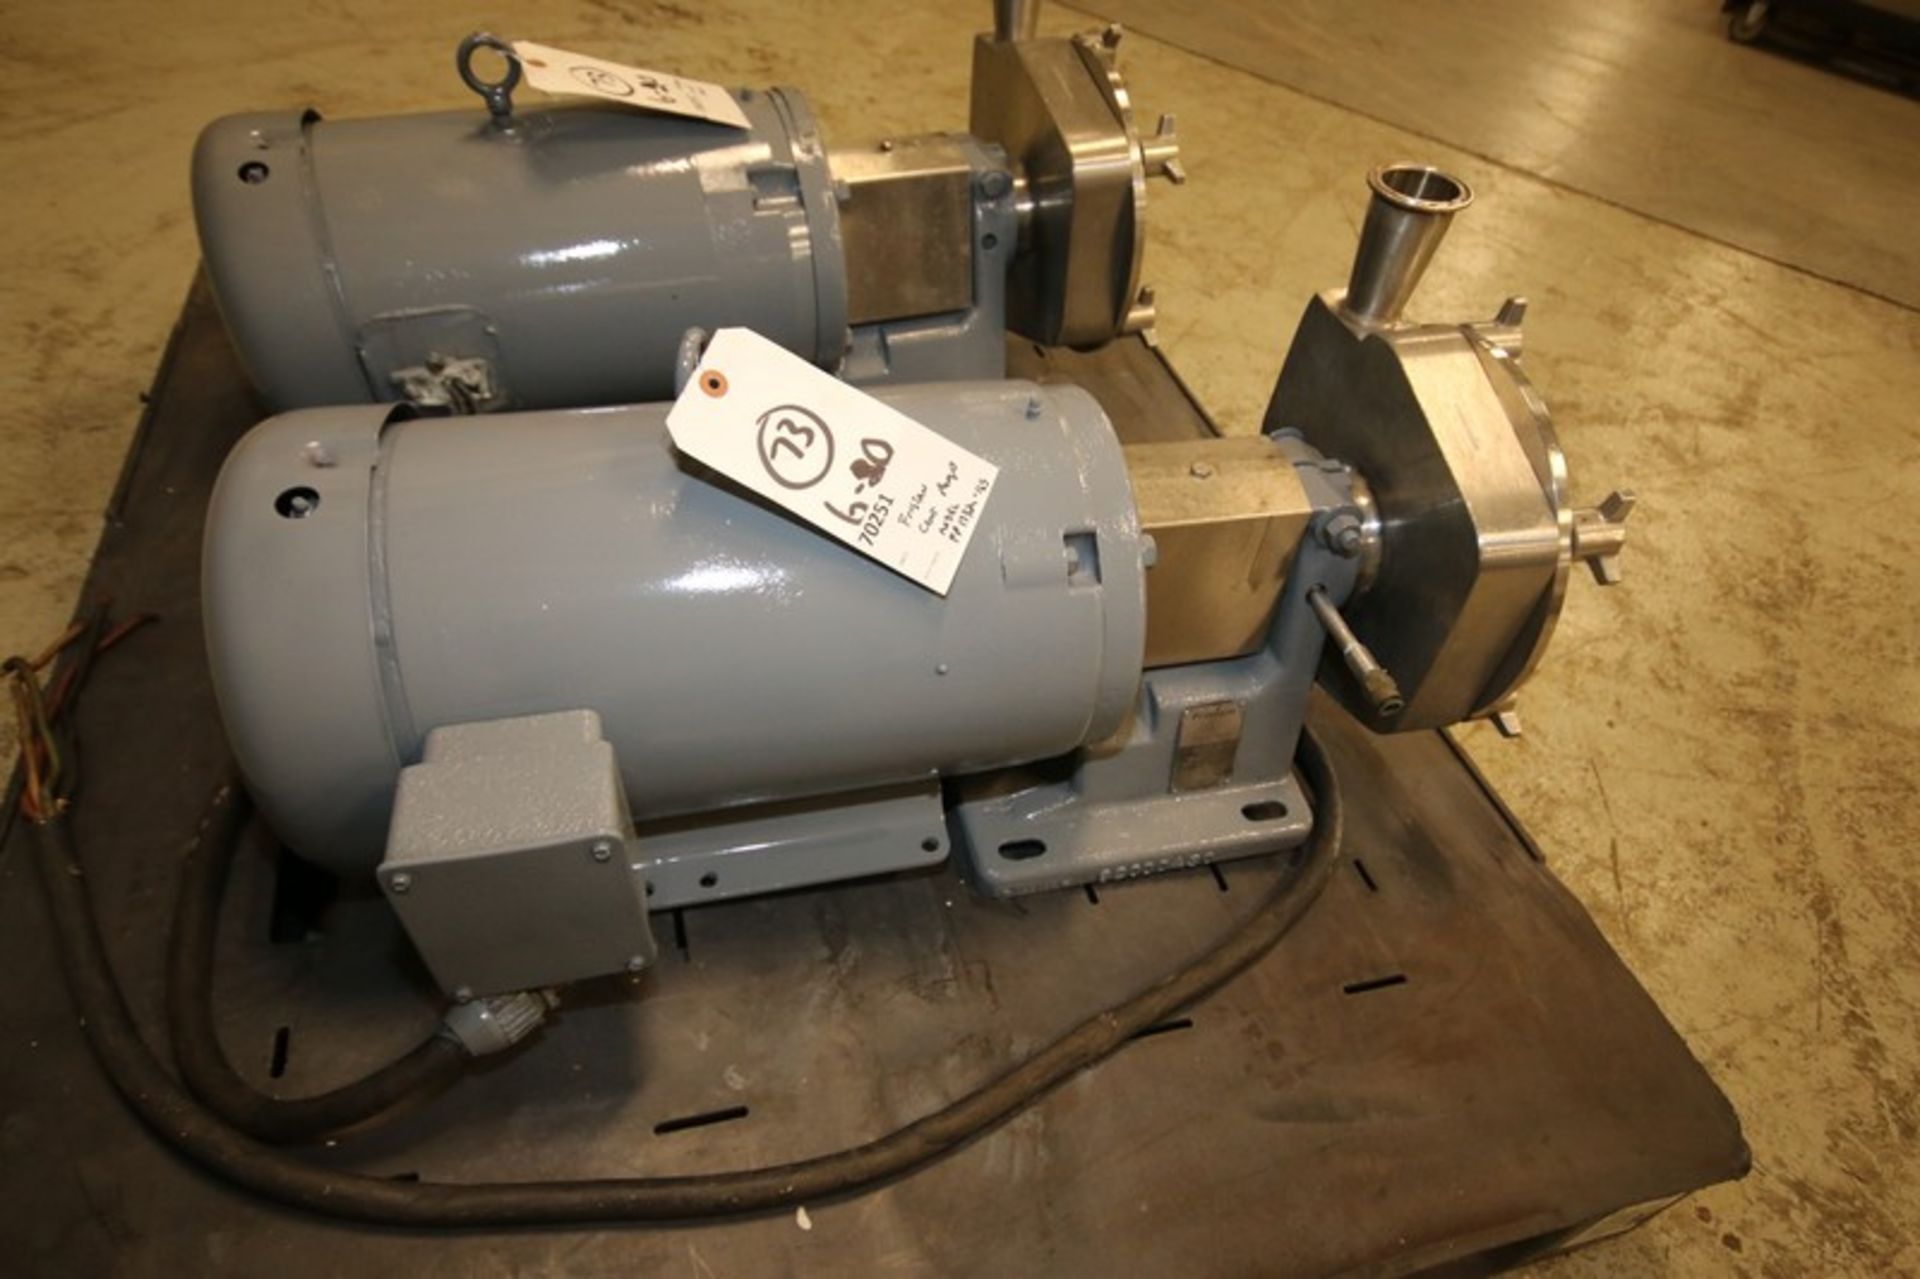 Fristam Aprox. 10 hp Centrifugal Pump, M/N FP1732-165, S/N FP175229739919, with Aprox. 2" x 3" Clamp - Image 3 of 5